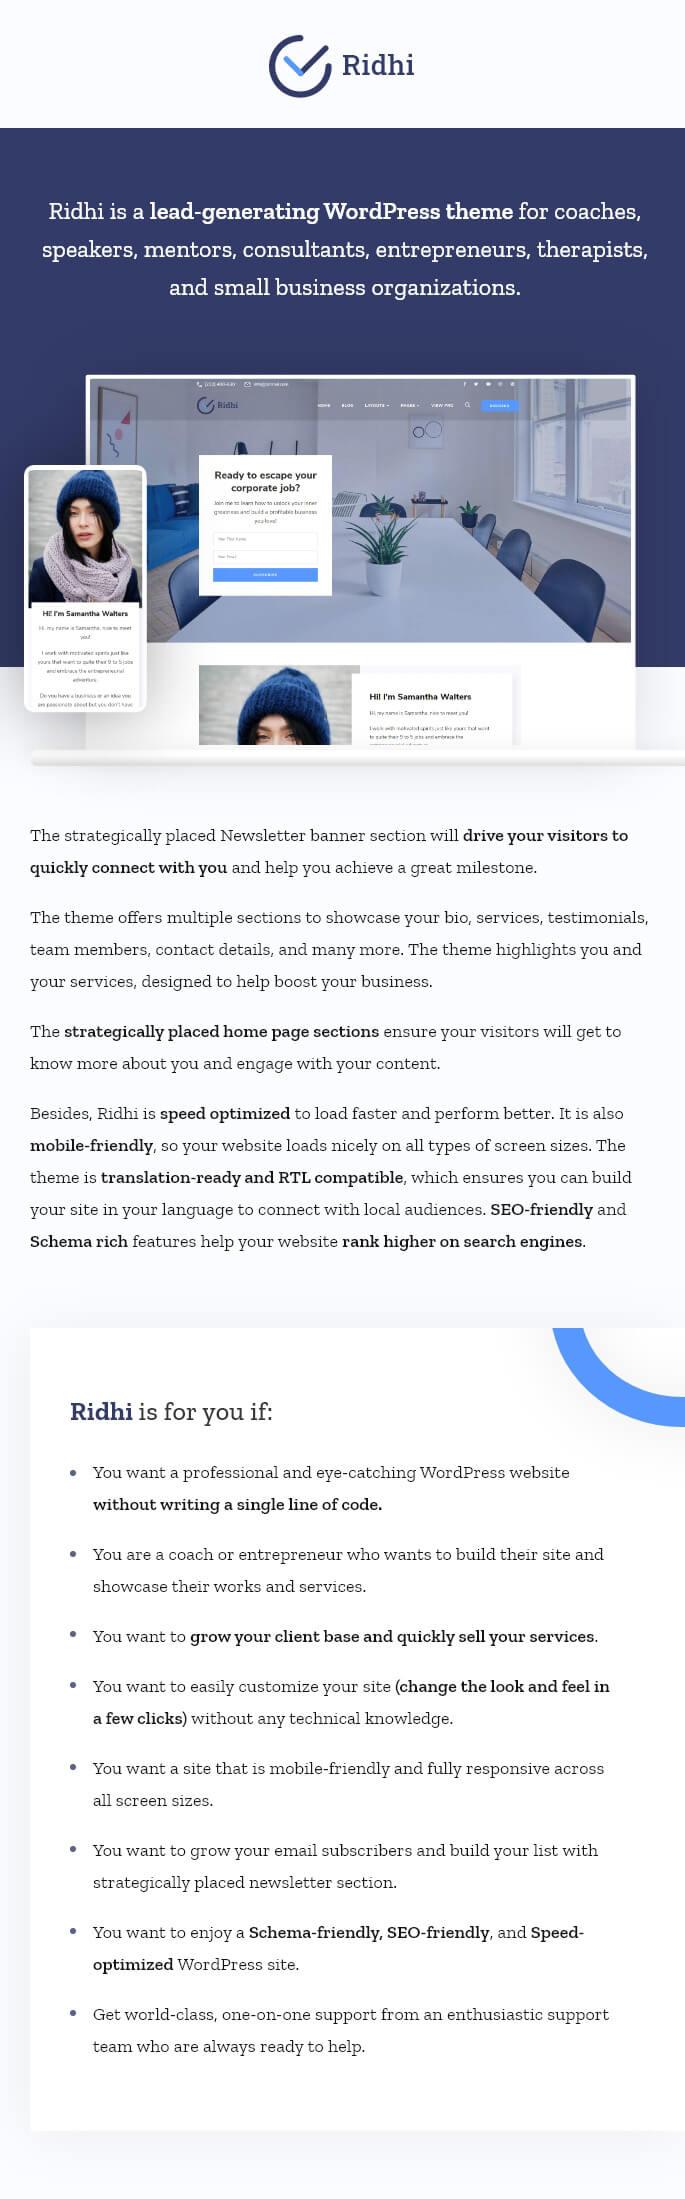 Features of Ridhi Pro WordPress